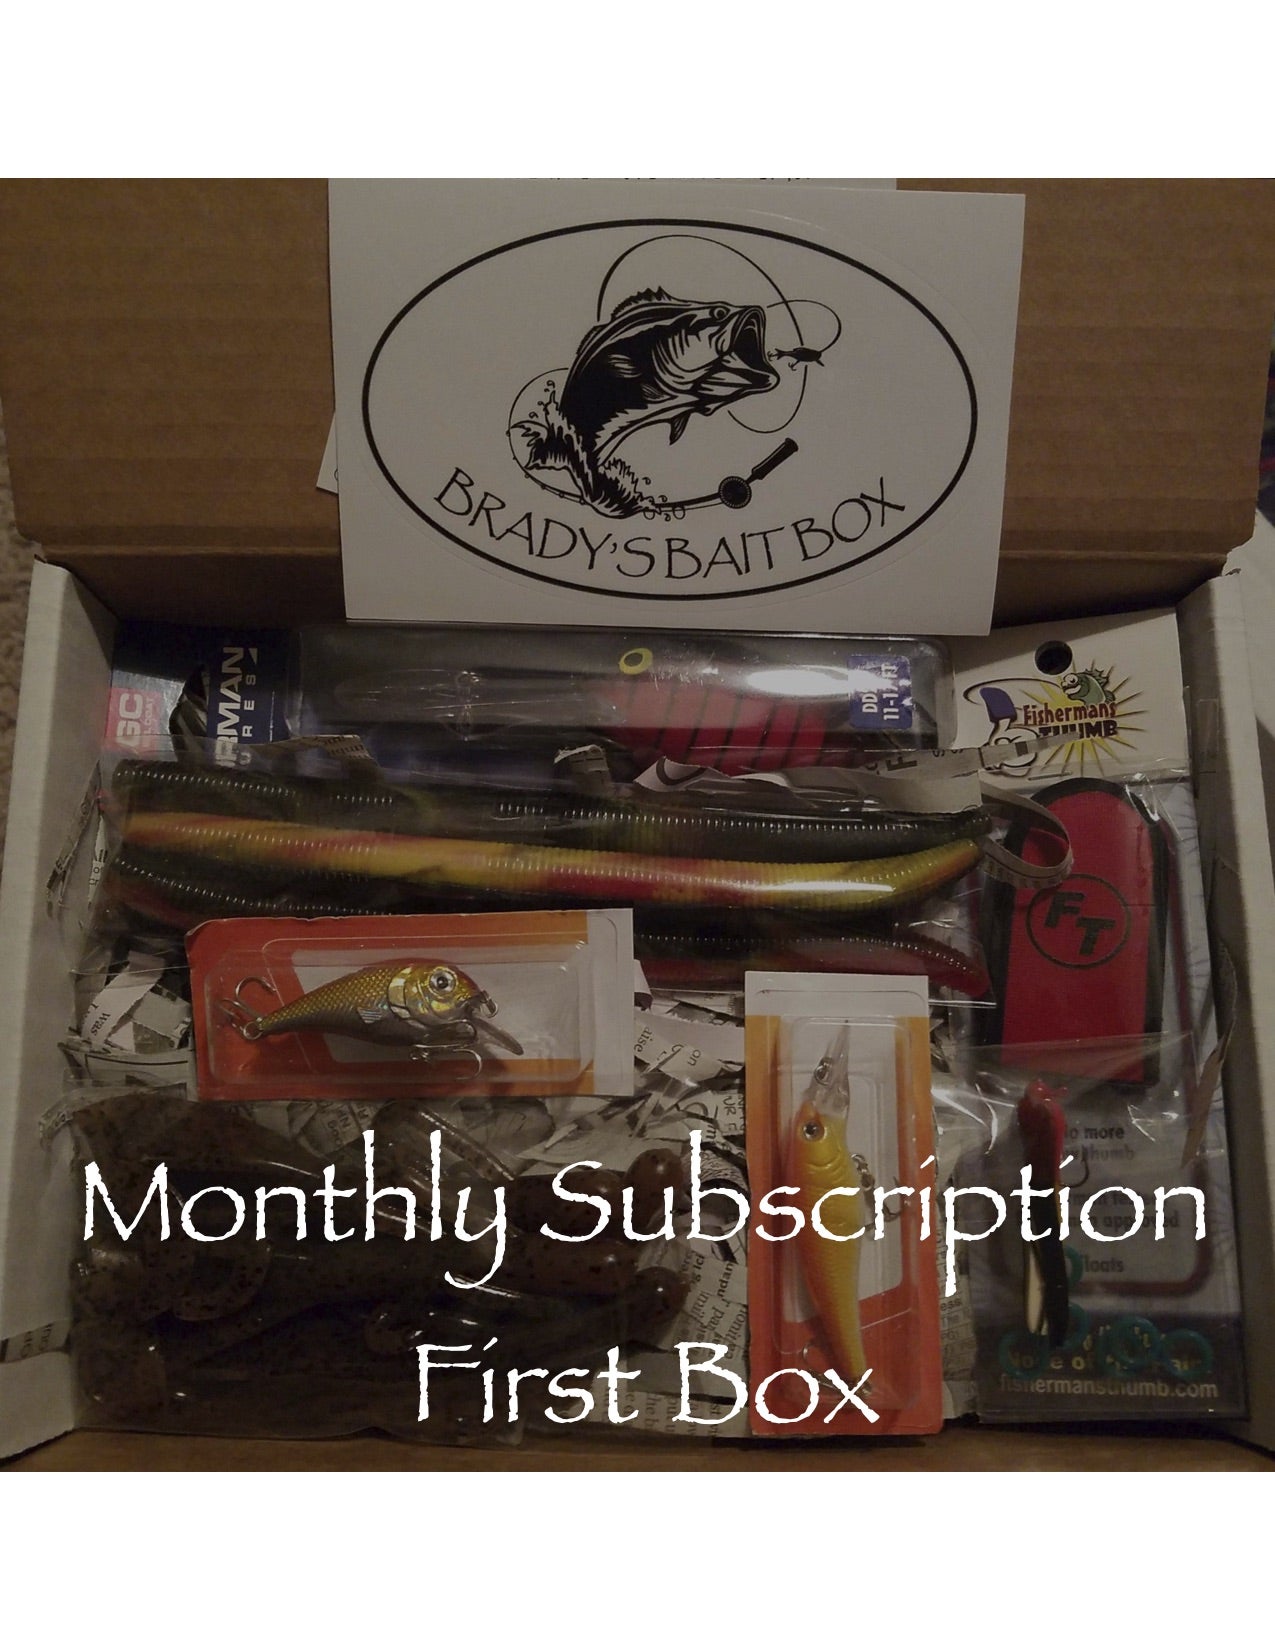 Monthly Subscription - First Box ($15 + $5 shipping)